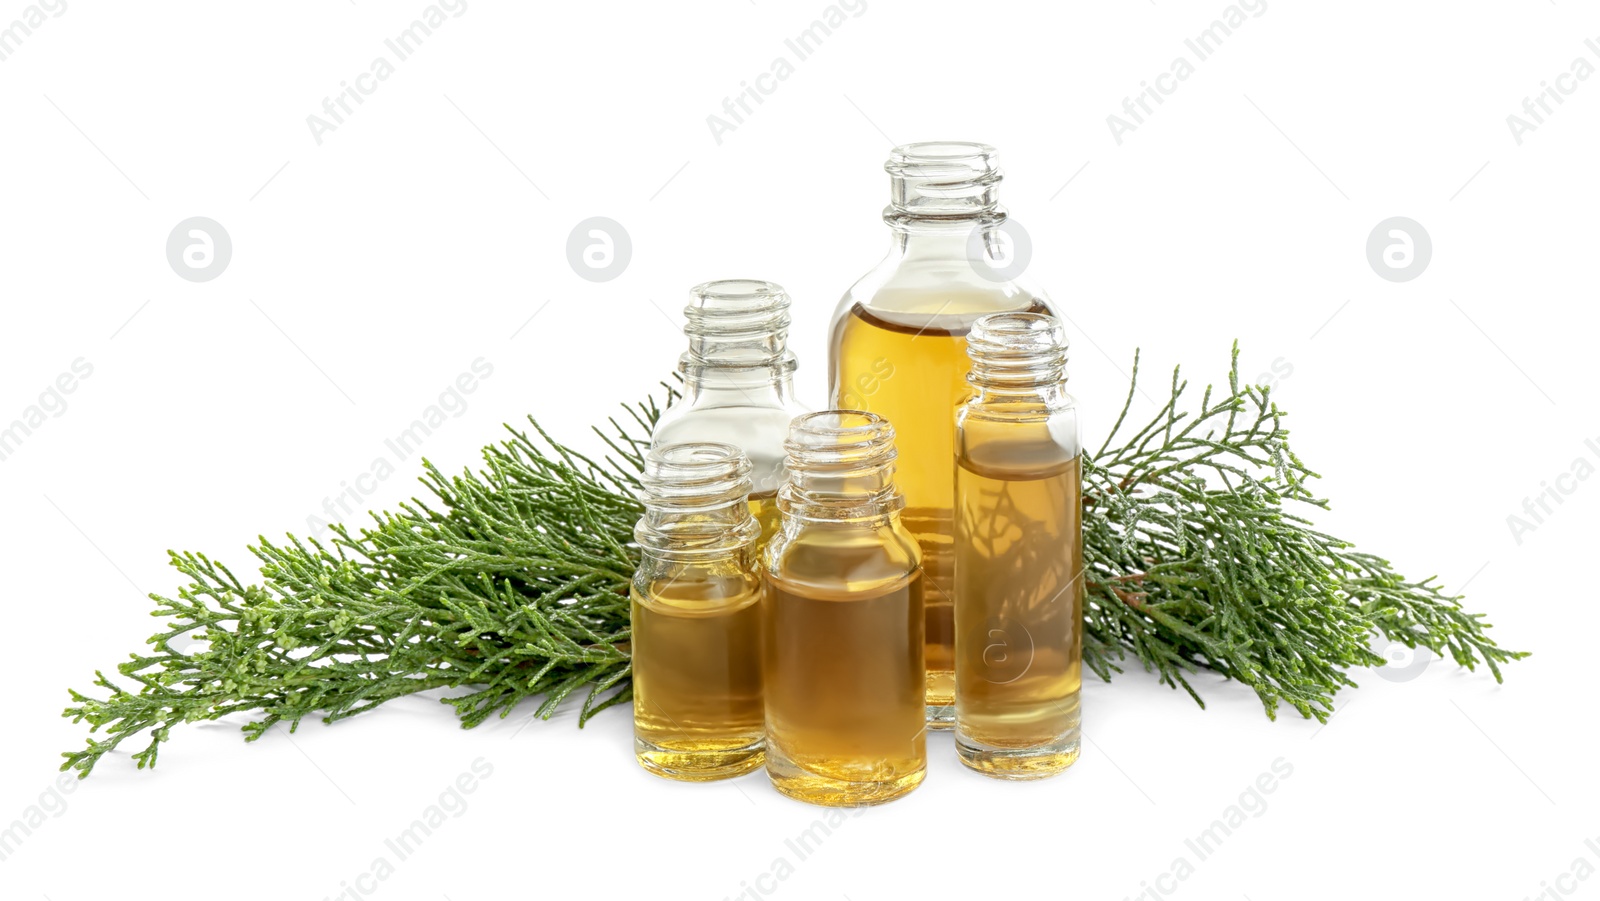 Photo of Different little bottles with essential oils and pine branches on white background